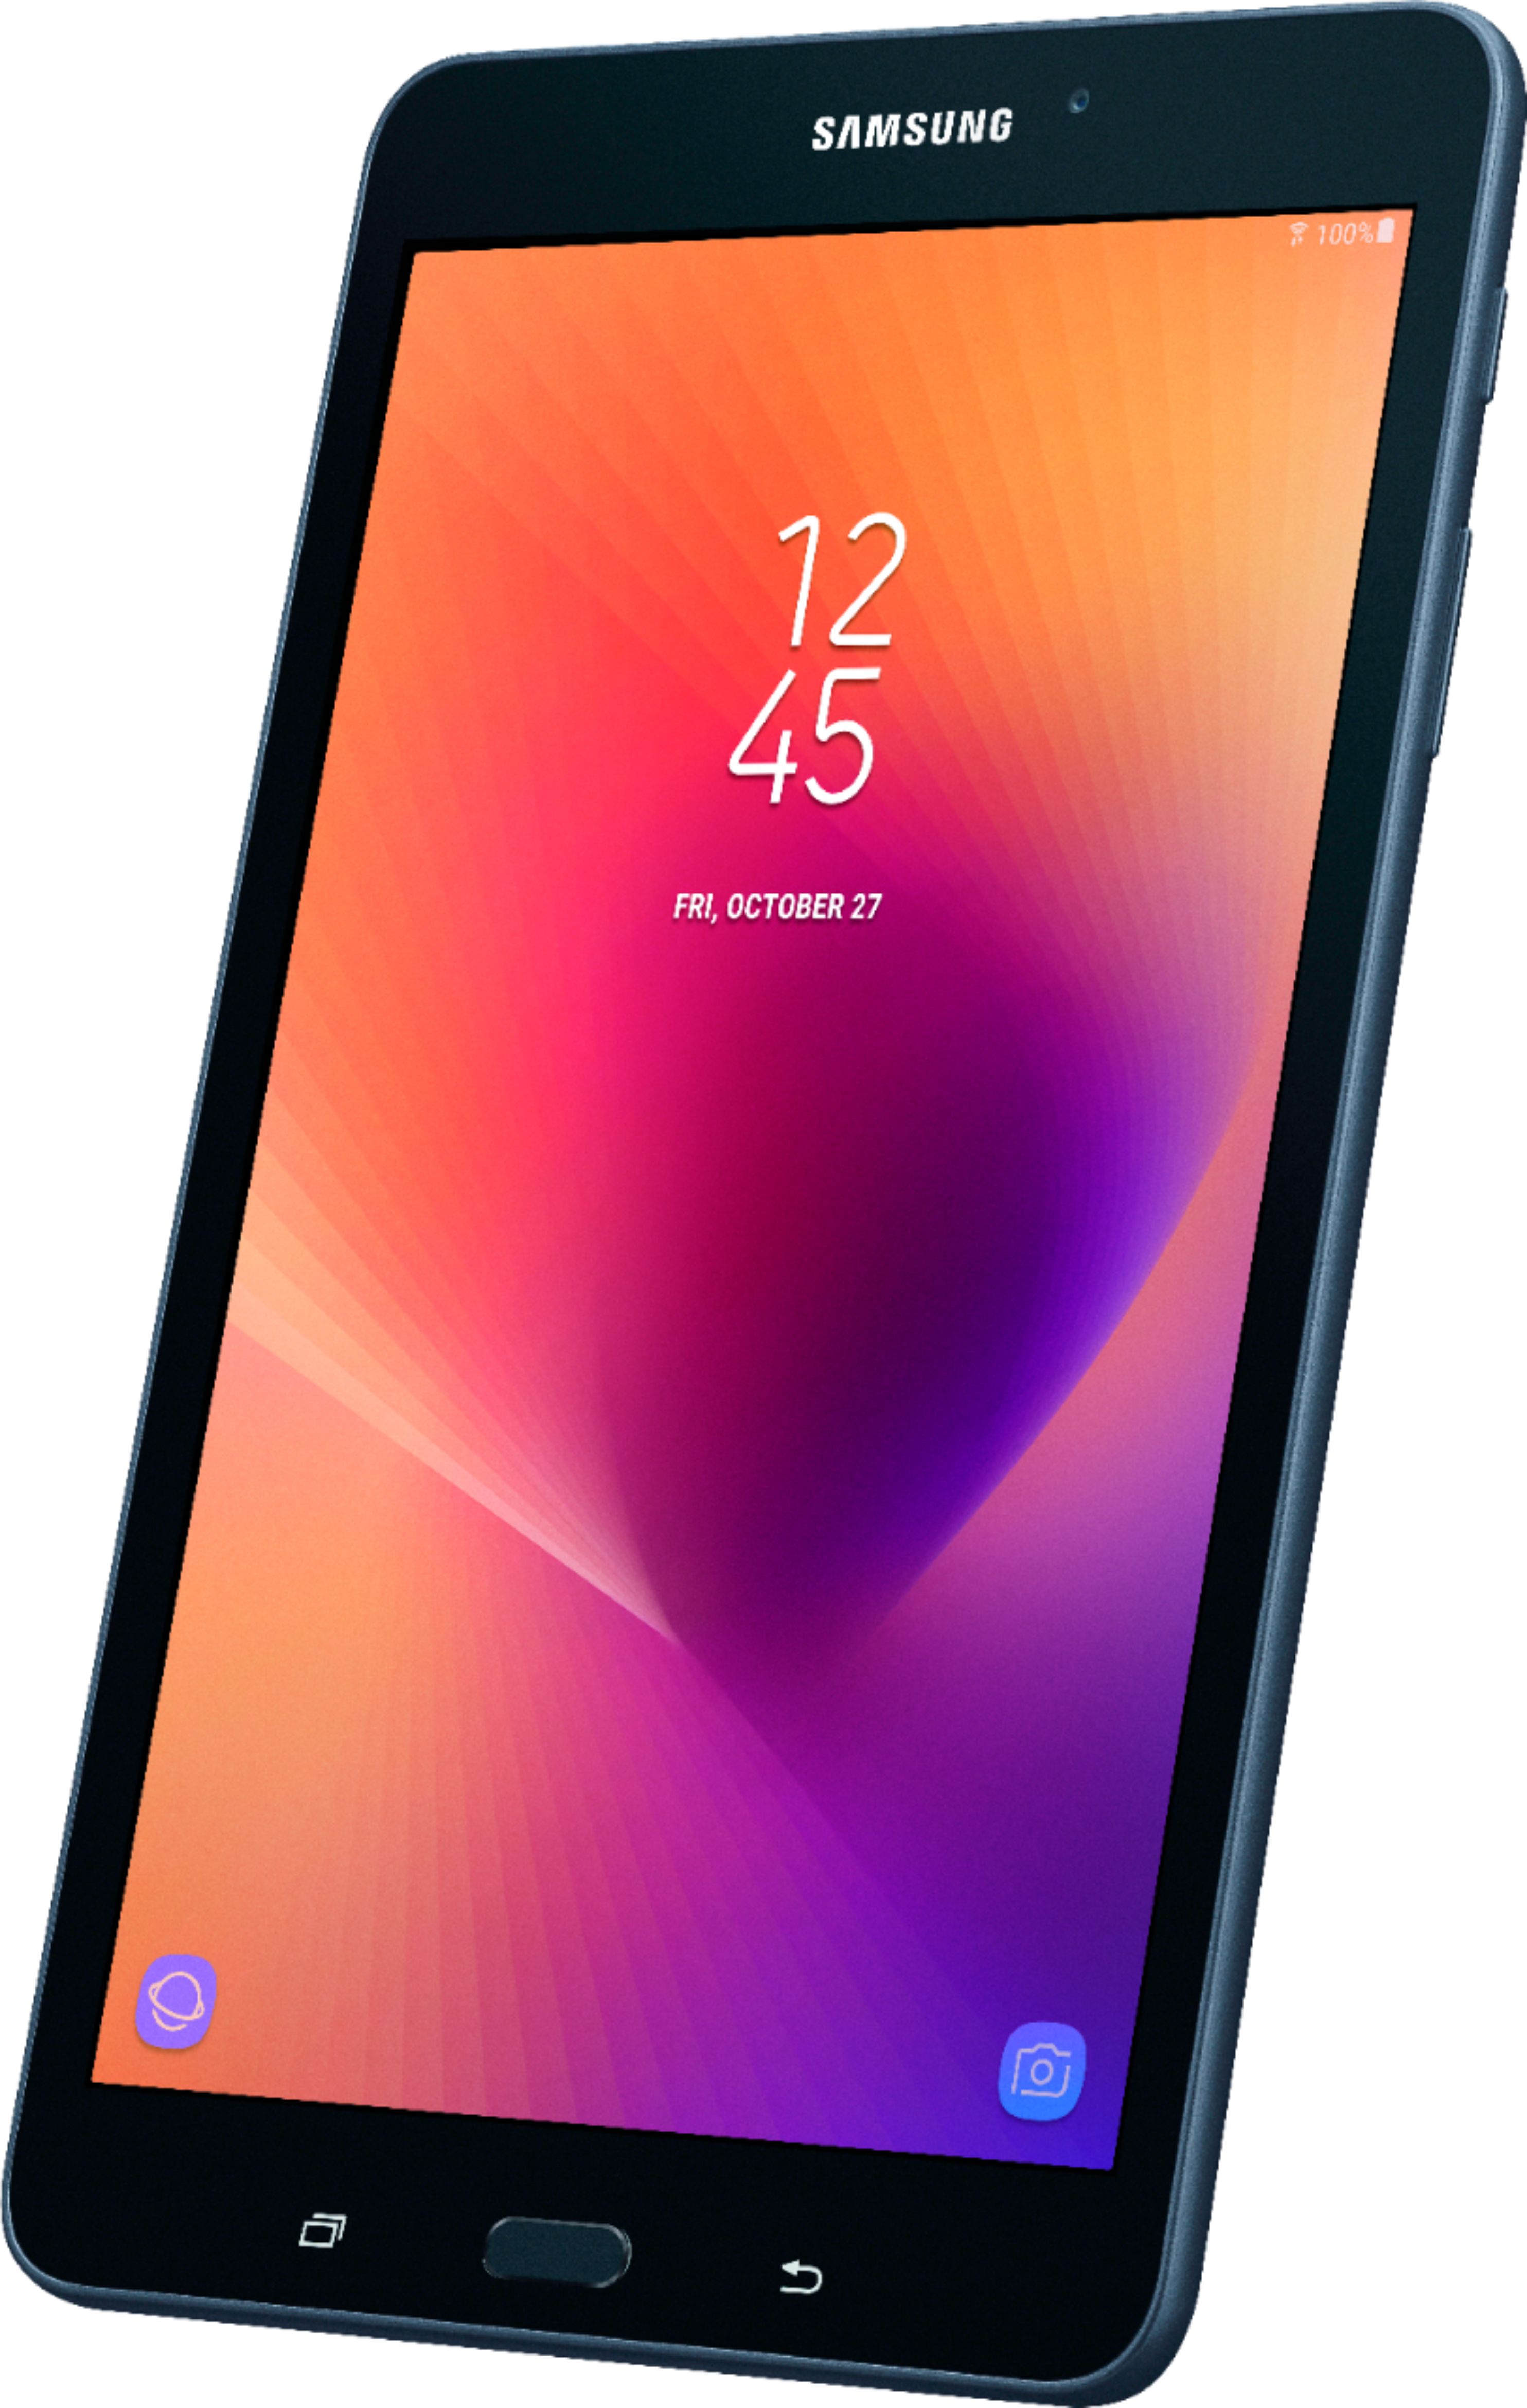 Samsung Galaxy Tab A 8.0 review: A suitable price for this simple